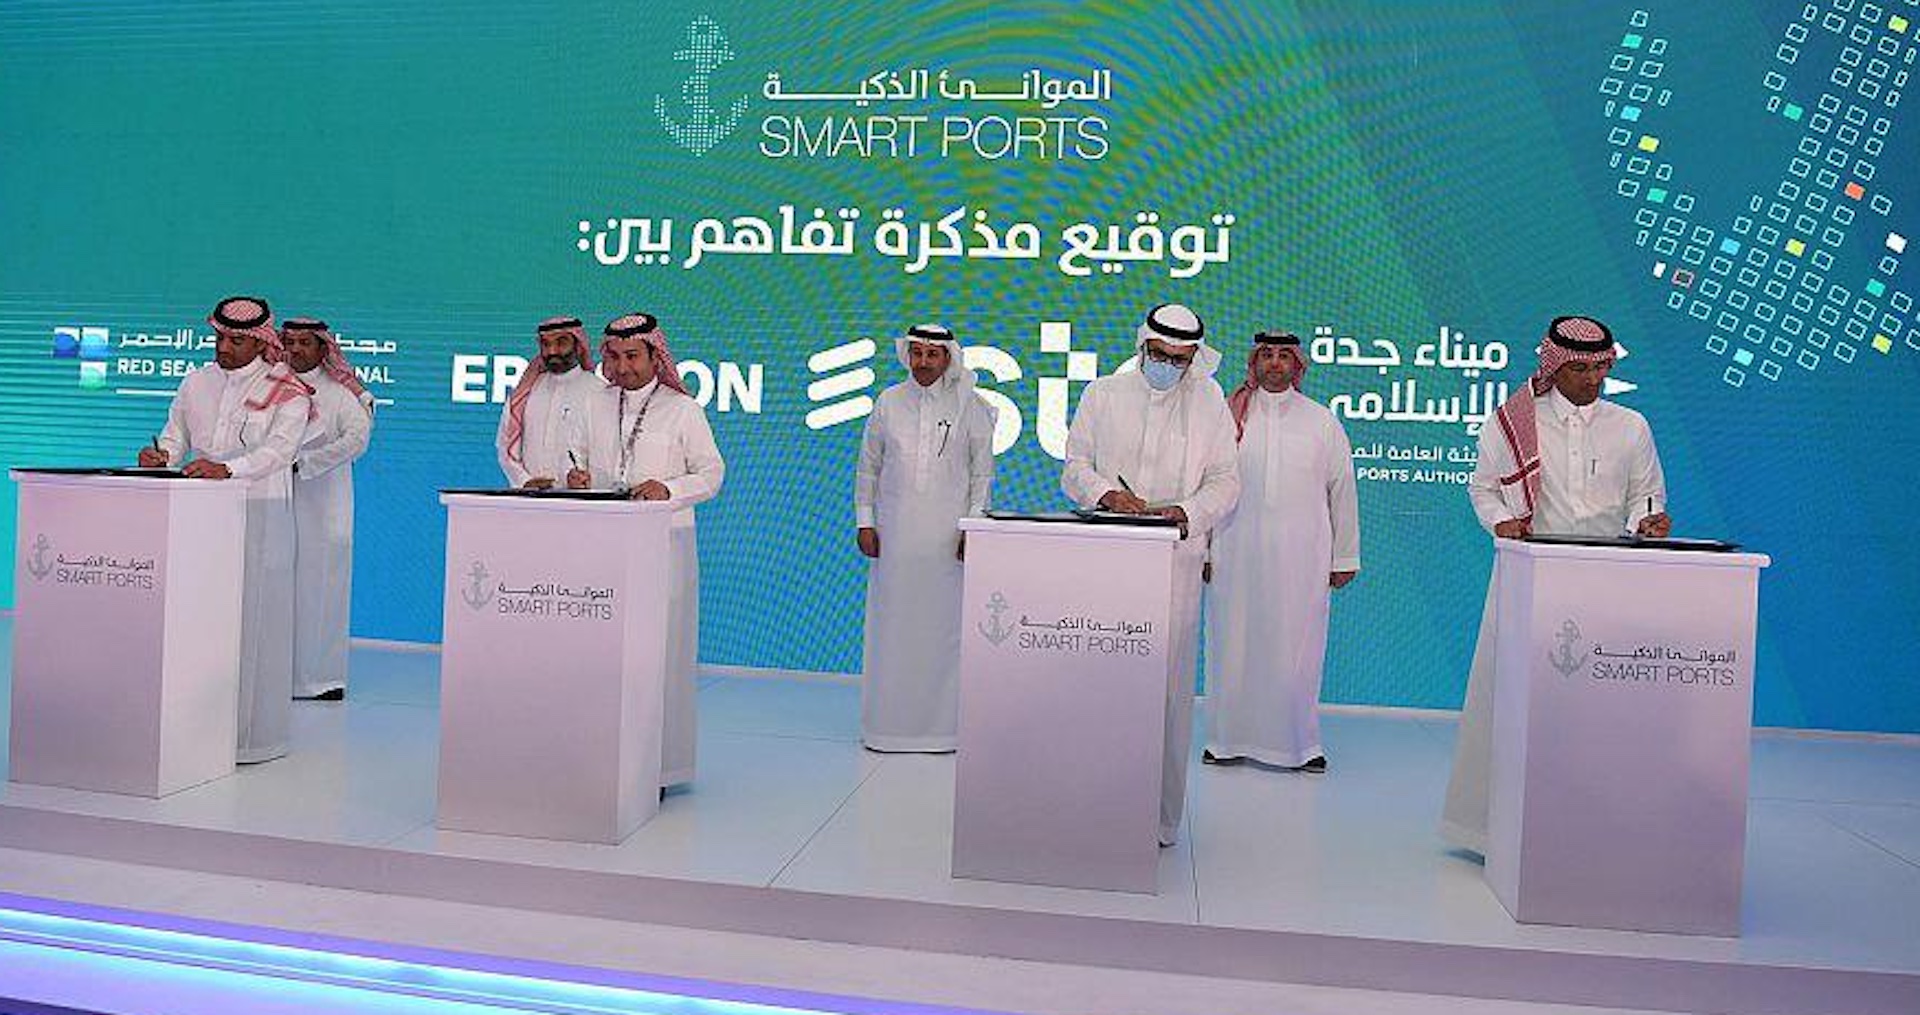 Mawani, stc sign 3 agreements for smart port transformation in KSA